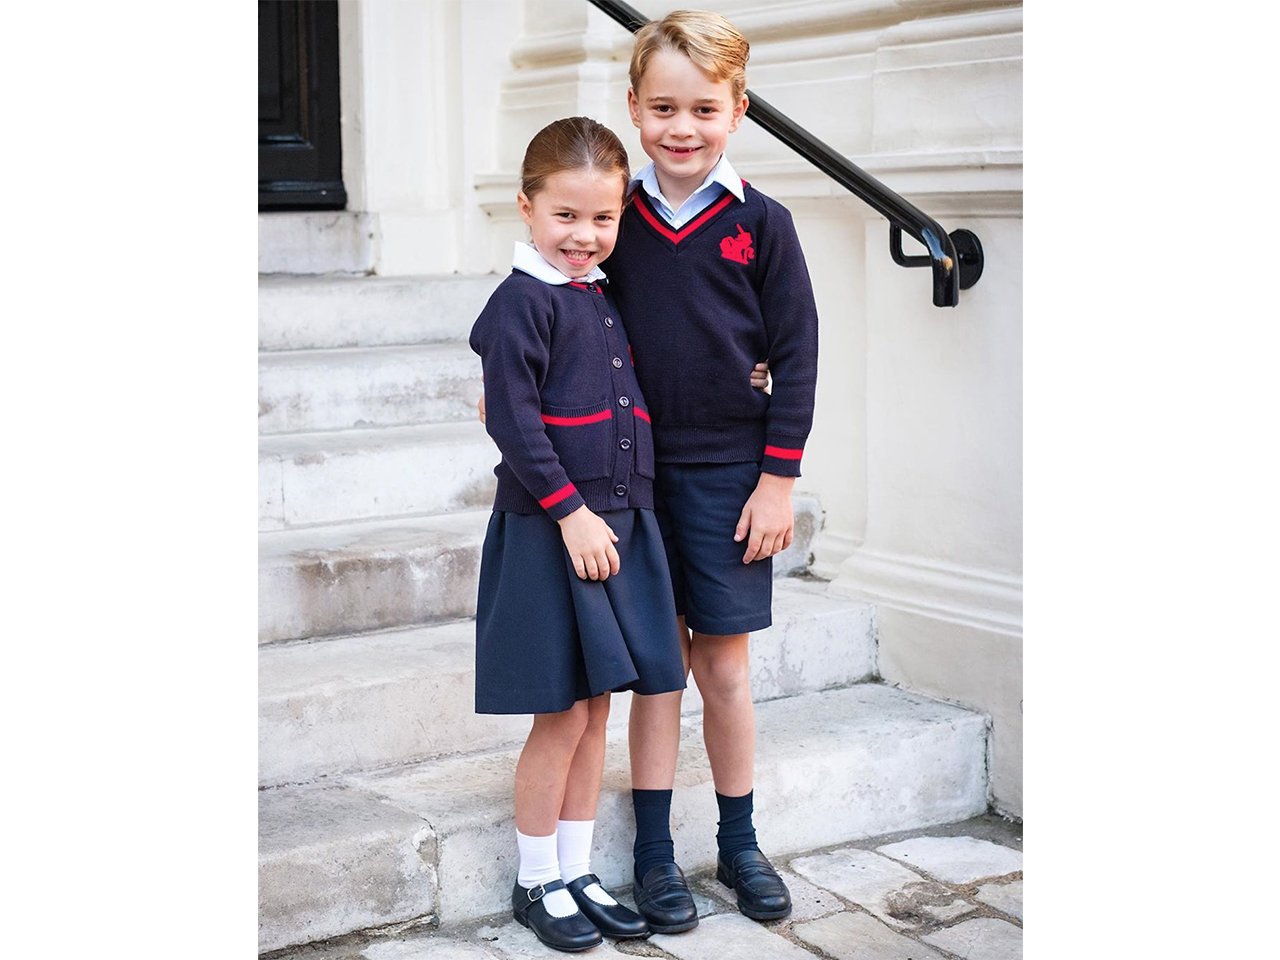 Princess charlotte and prince george posing in their school uniforms